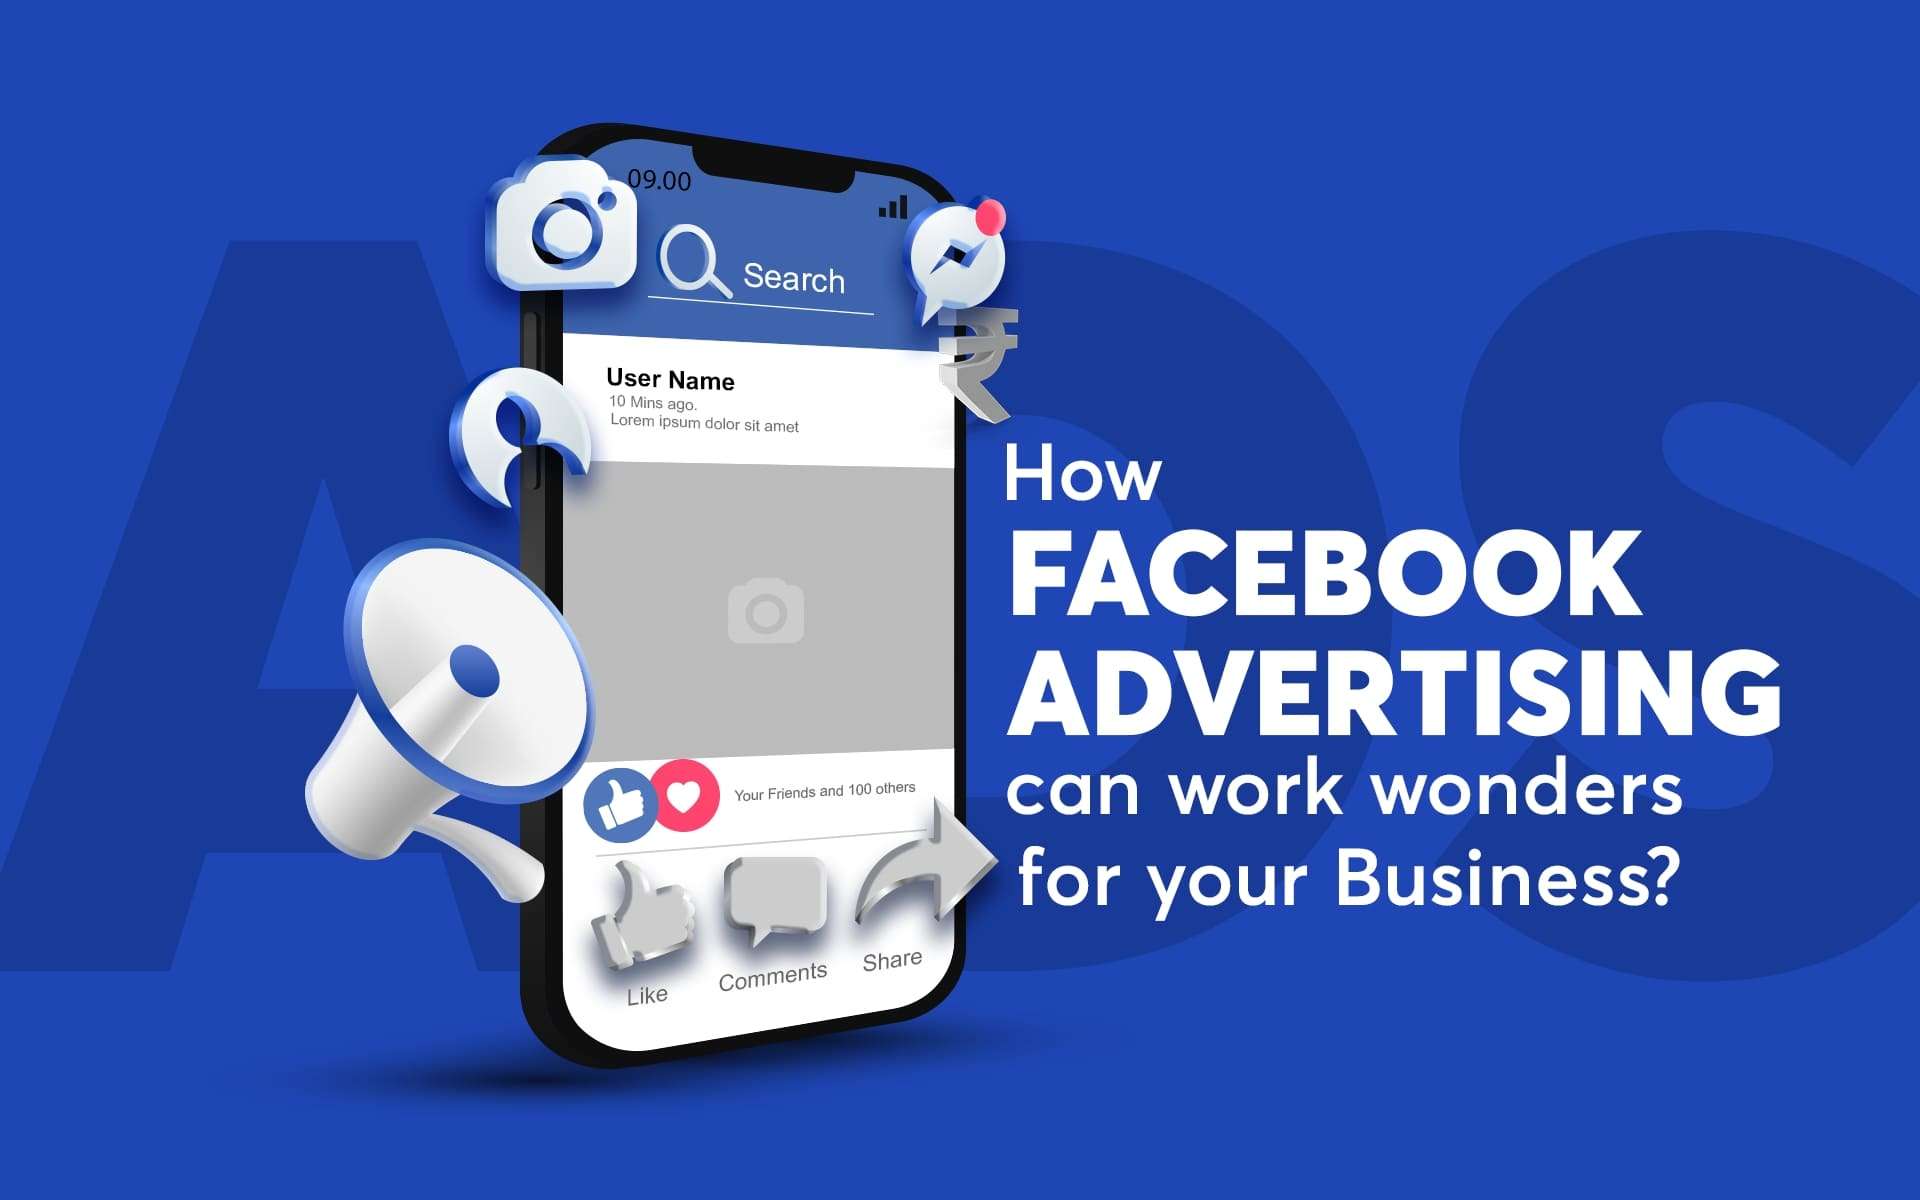 Facebook Advertising can work wonders for your Business